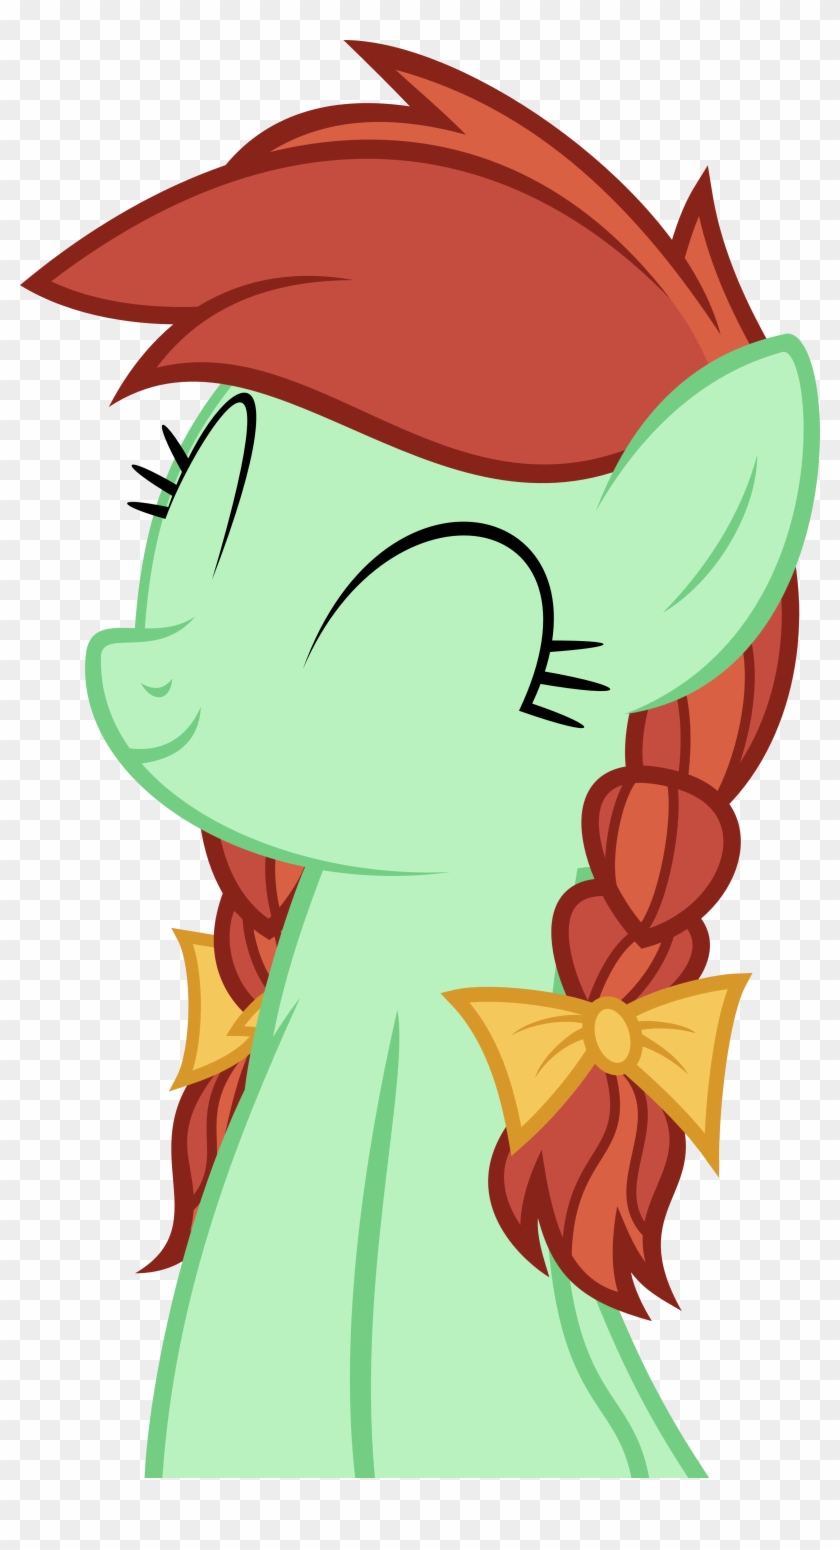 Candy Apples By Cider-crave - Mlp Candy Apples Vector #1022436